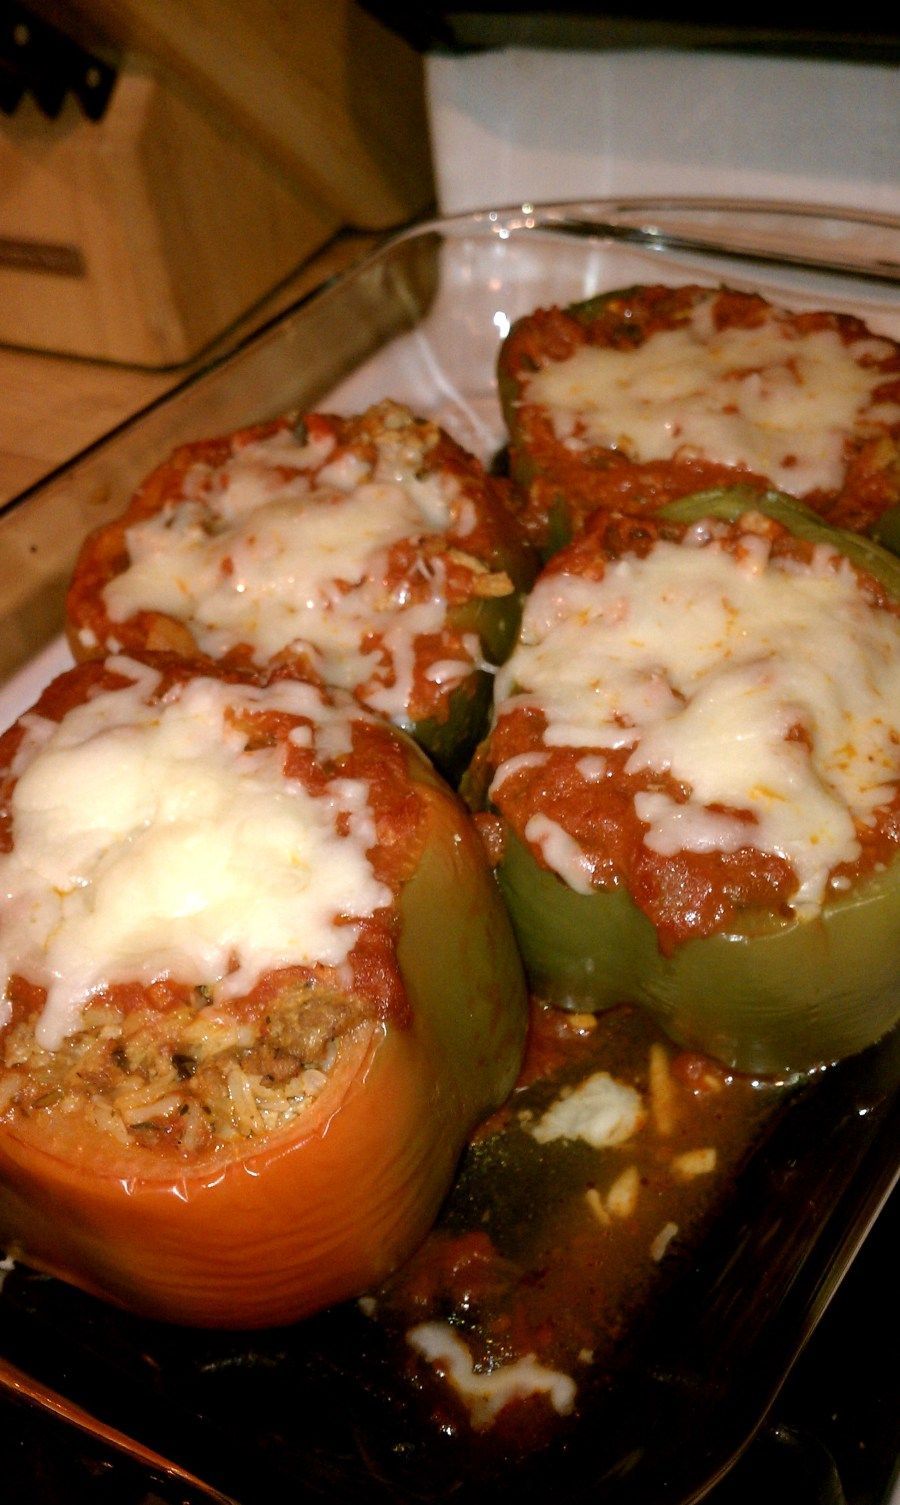 Stuffed Peppers My favorite childhood fish! Scooped out bell peppers with a meat